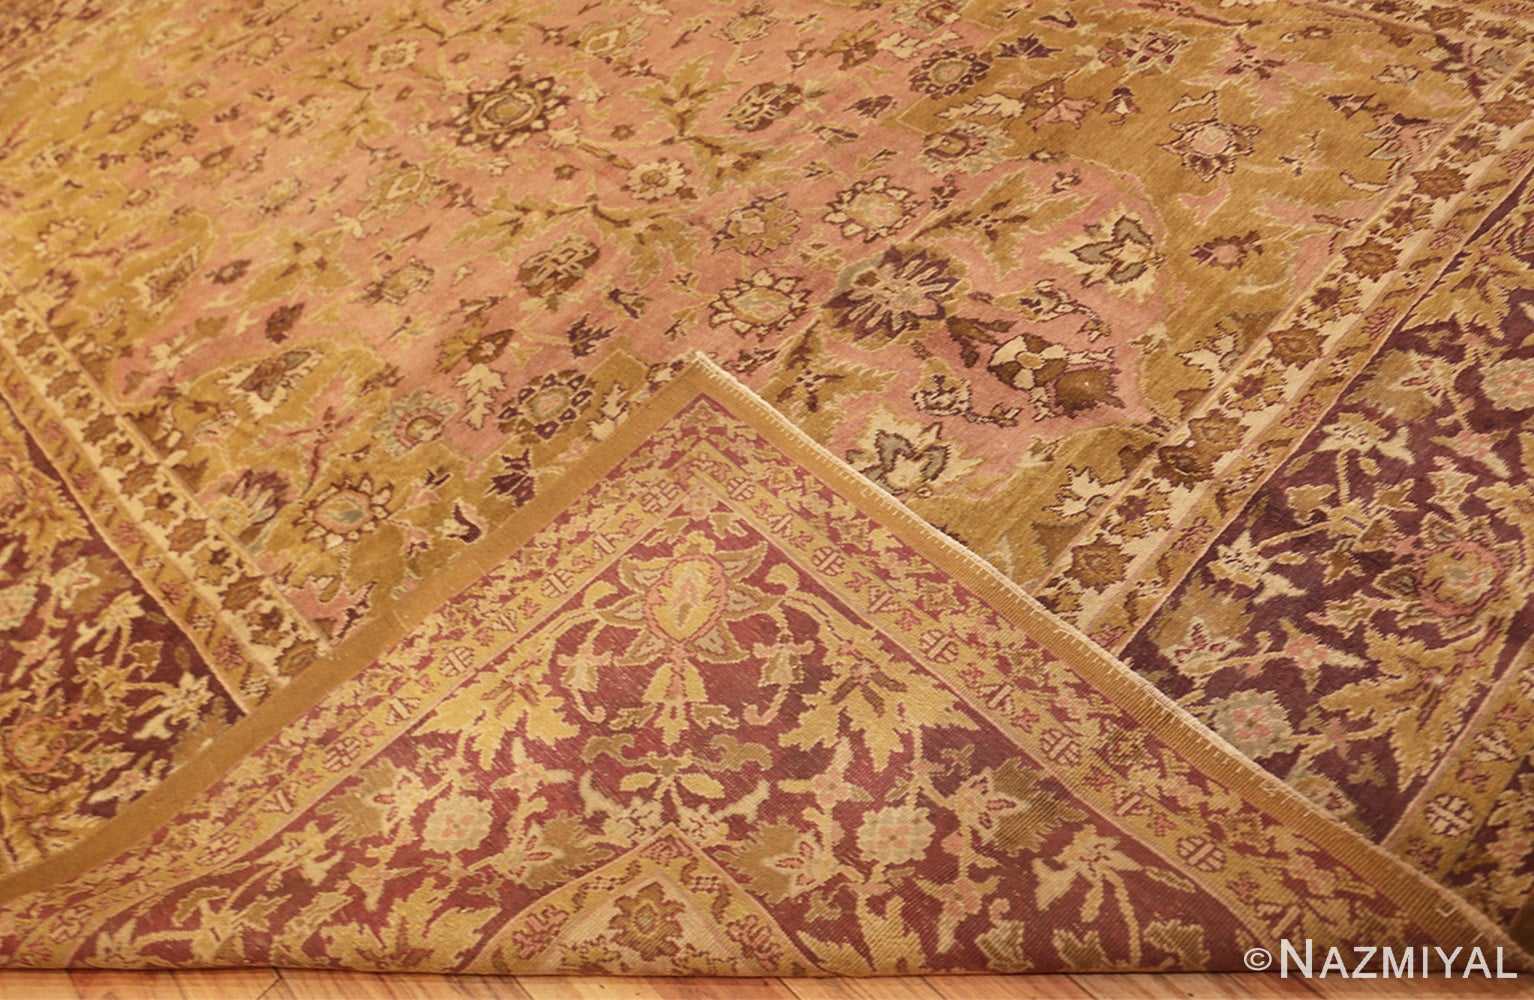 Weave Of Polonaise Design Late 19th Century Antique Indian Agra Rug 48840 by Nazmiyal NYC